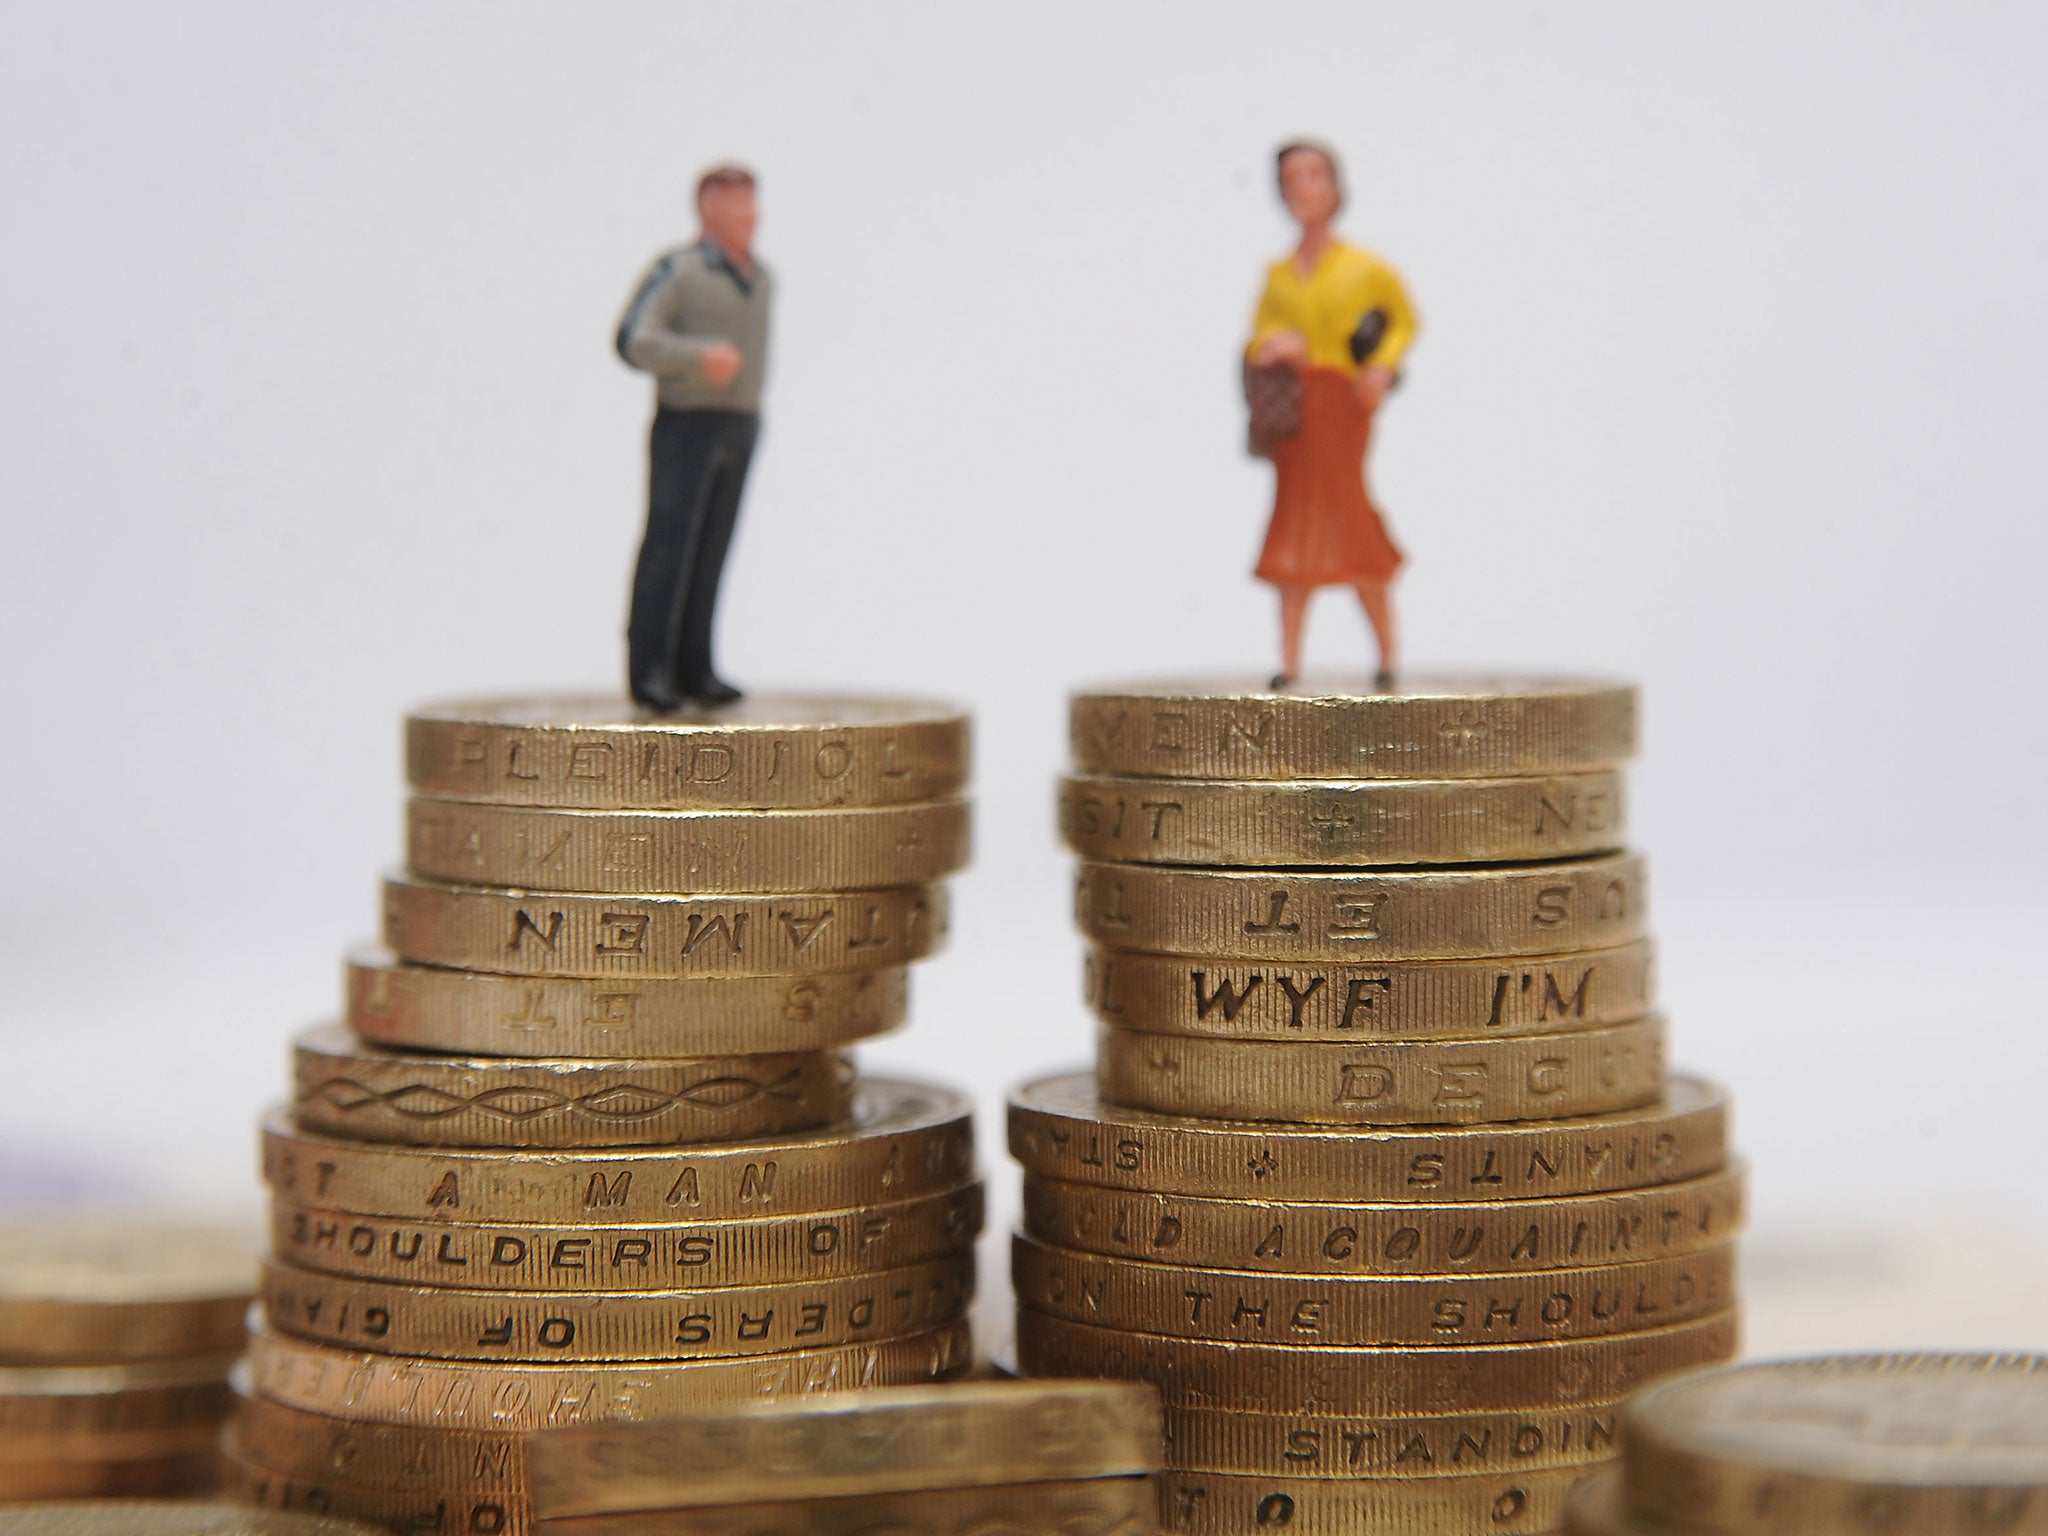 New research suggests that women can expect to make £300,000 less than men over the course of their careers